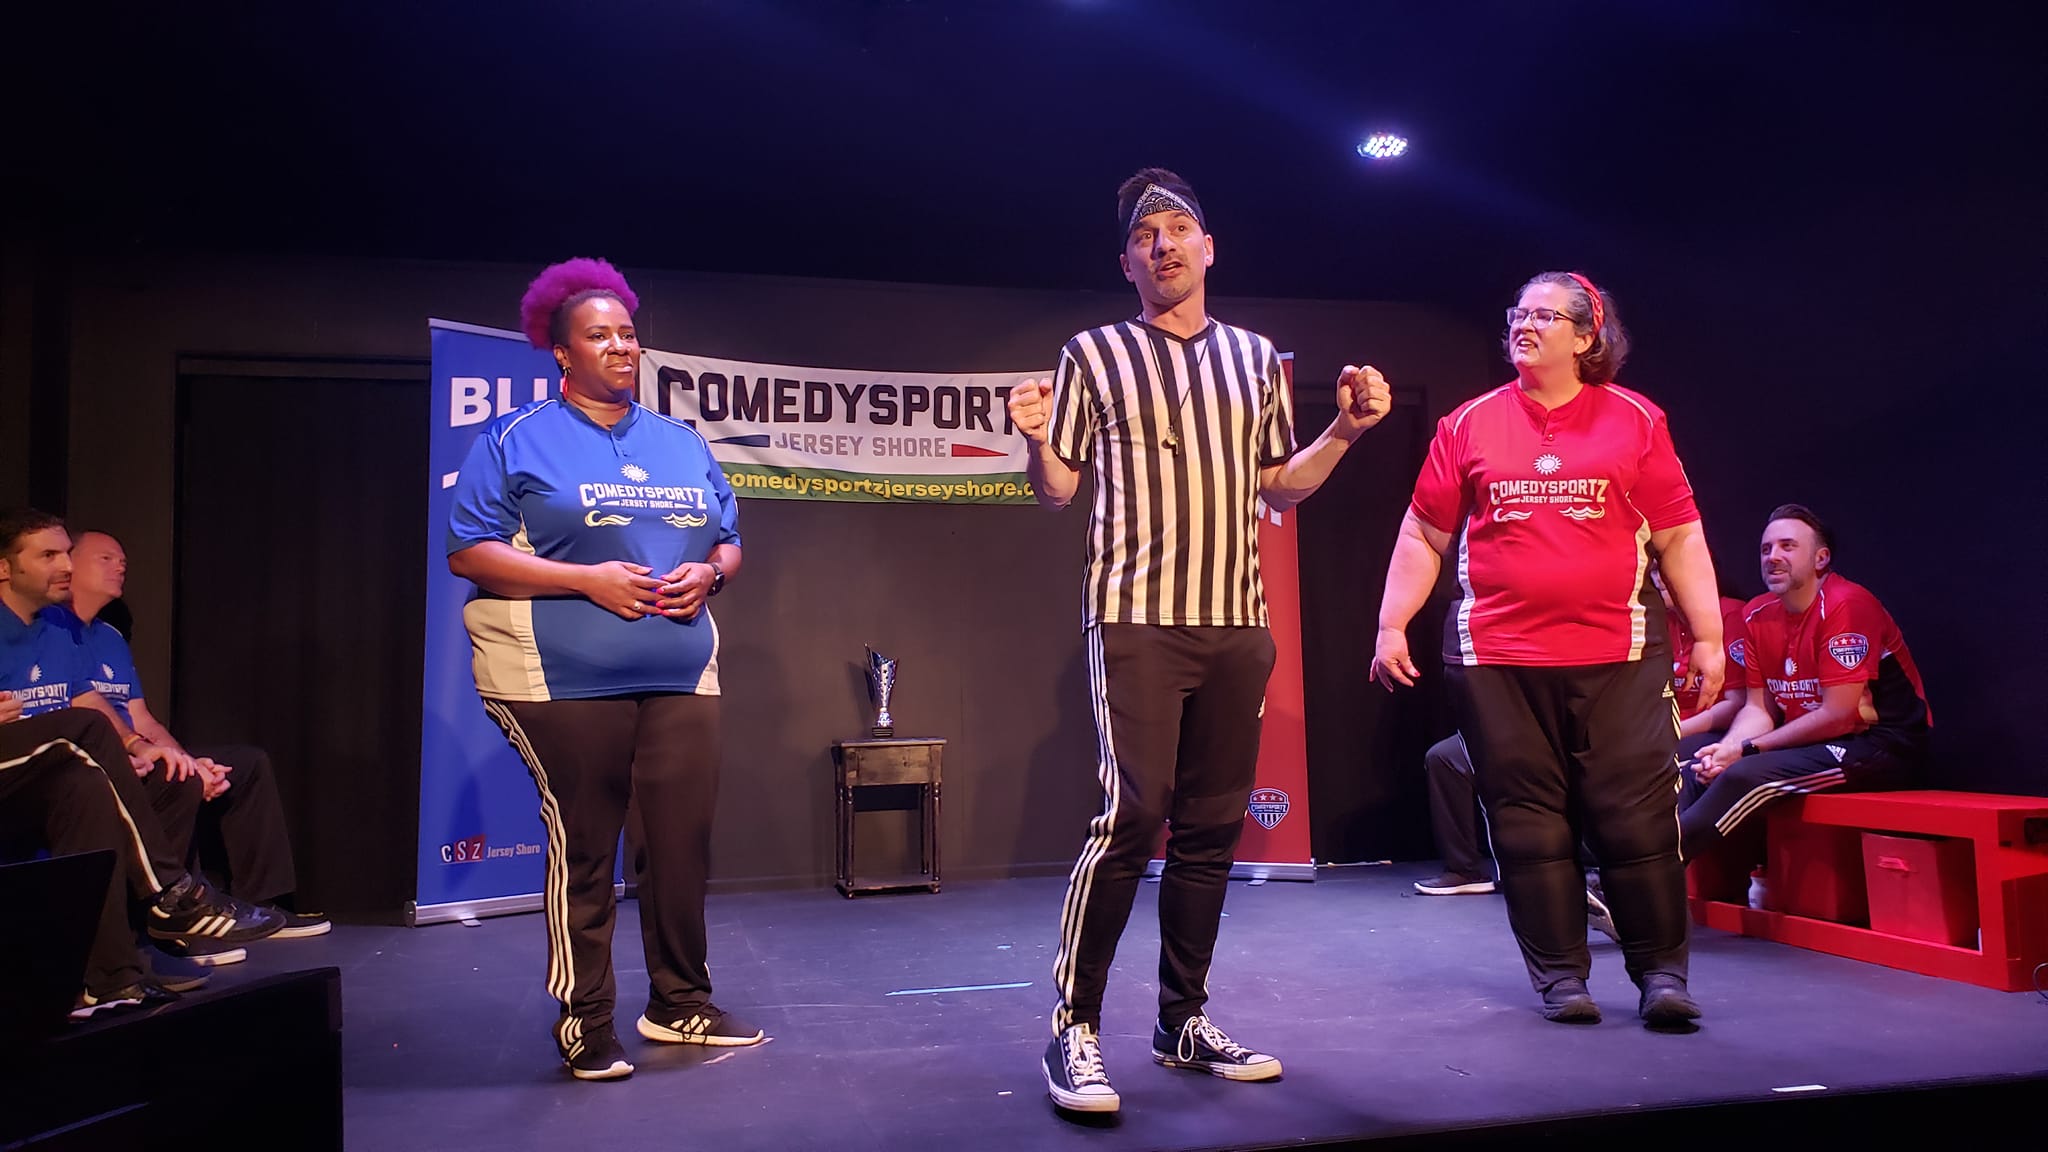 ComedySportz Jersey Shore improvisers on stage